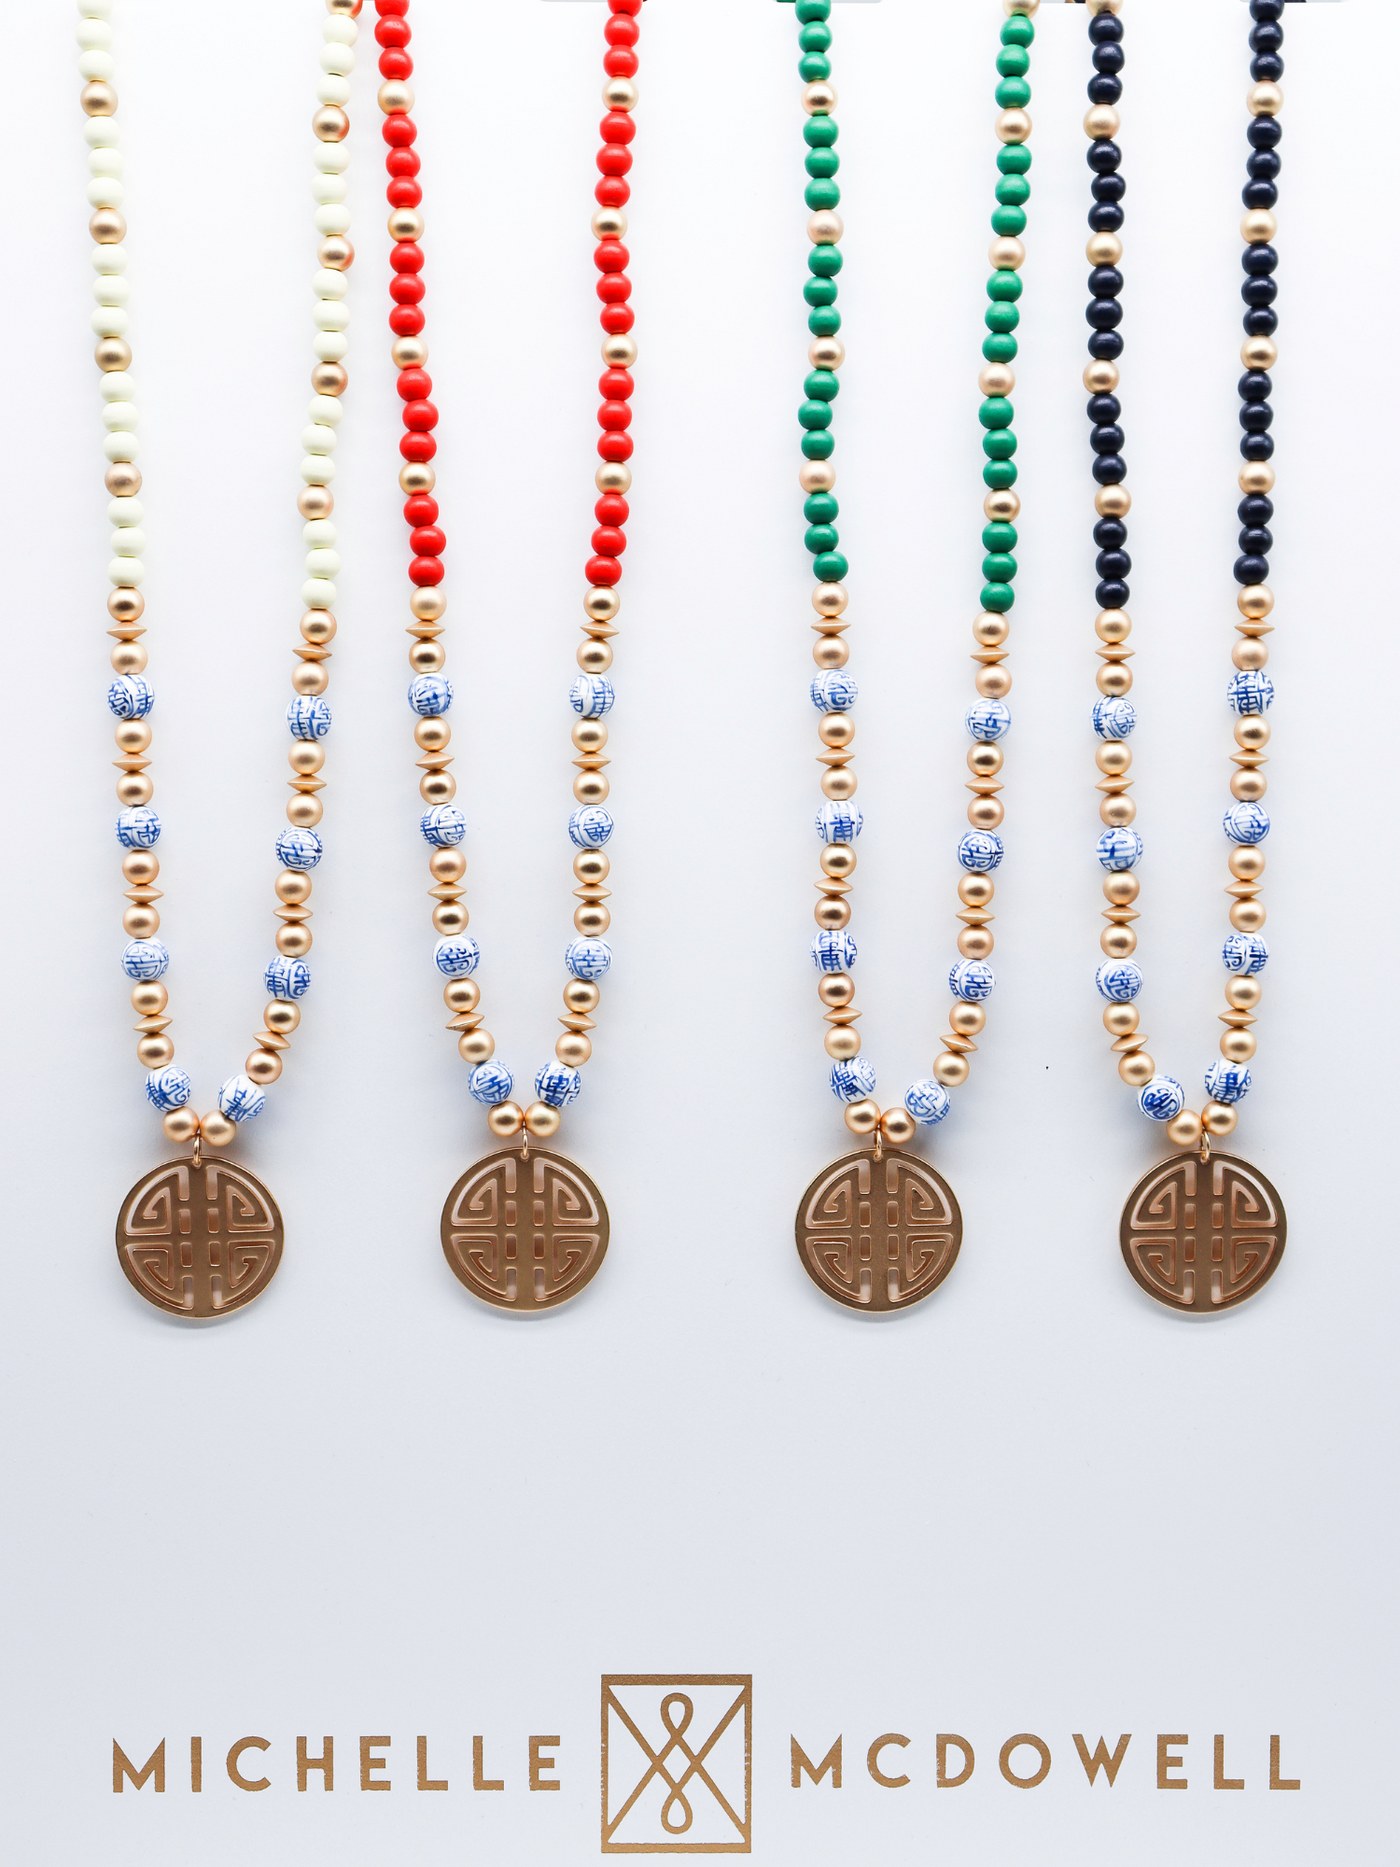 Michelle McDowell Ronan Necklaces all colors.